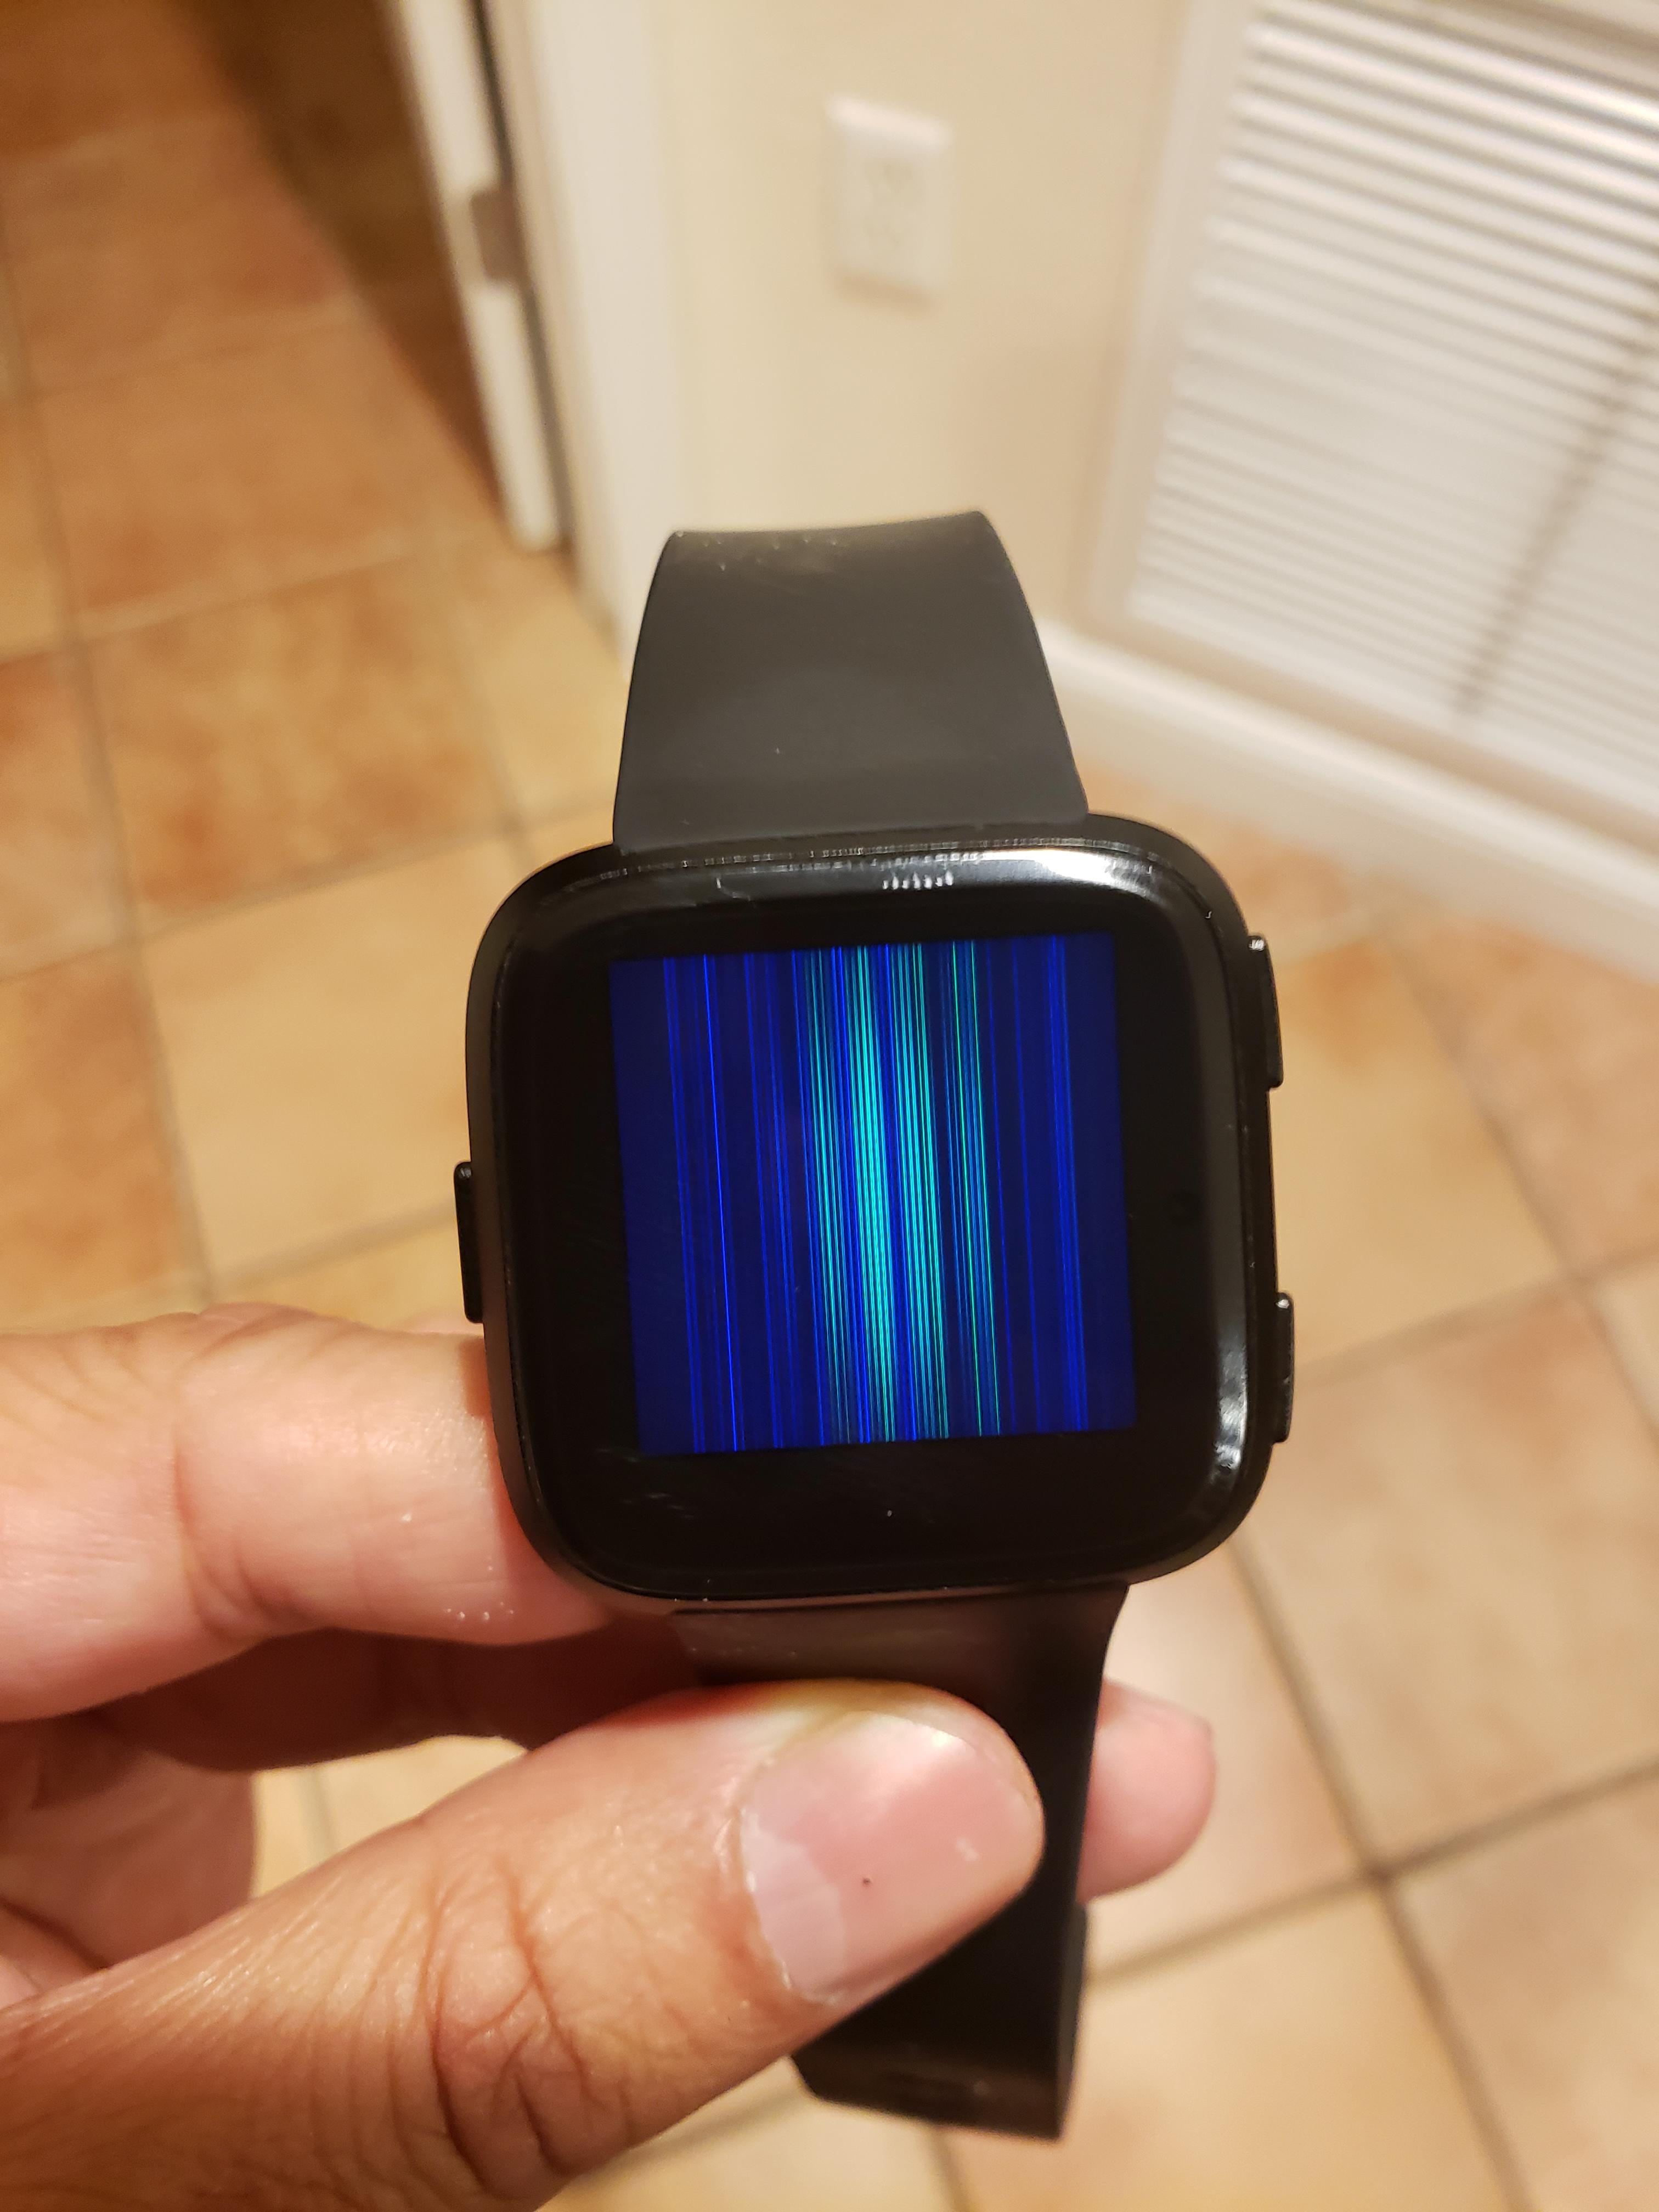 why does my fitbit have lines on the screen